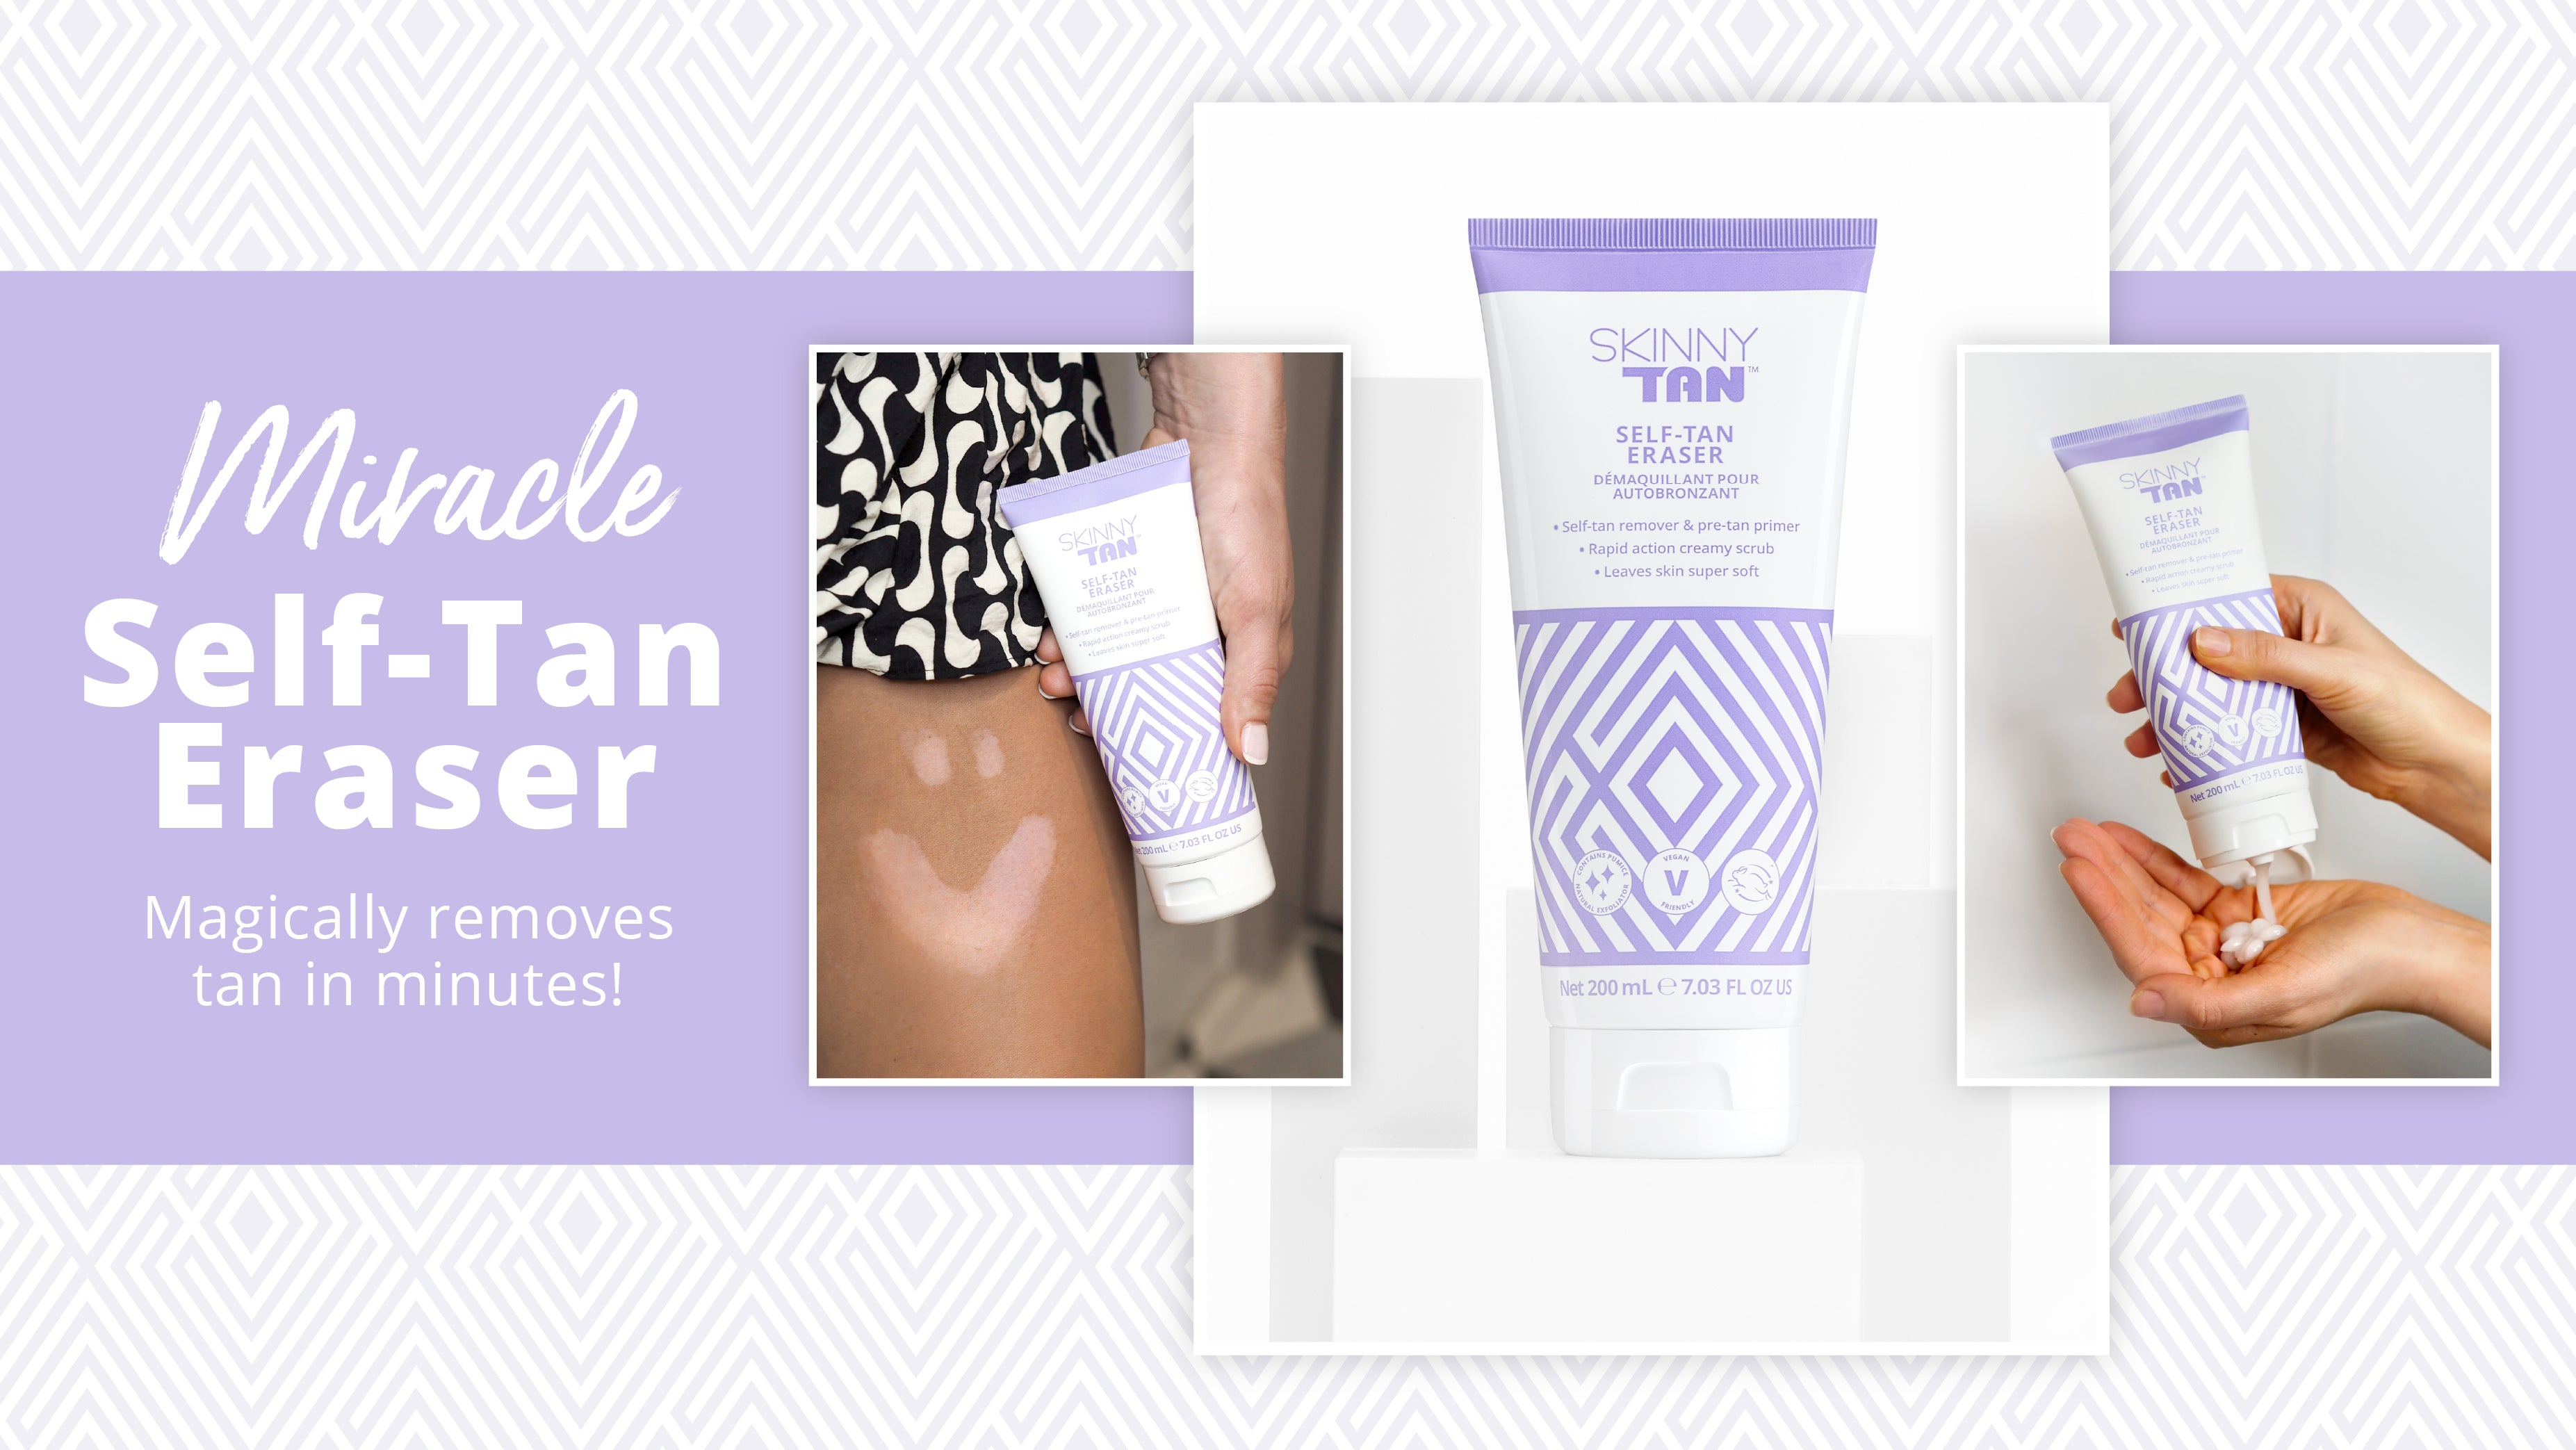 NEW Miracle Tan Eraser: Removing Old Self-Tan Has Never Been Easier!